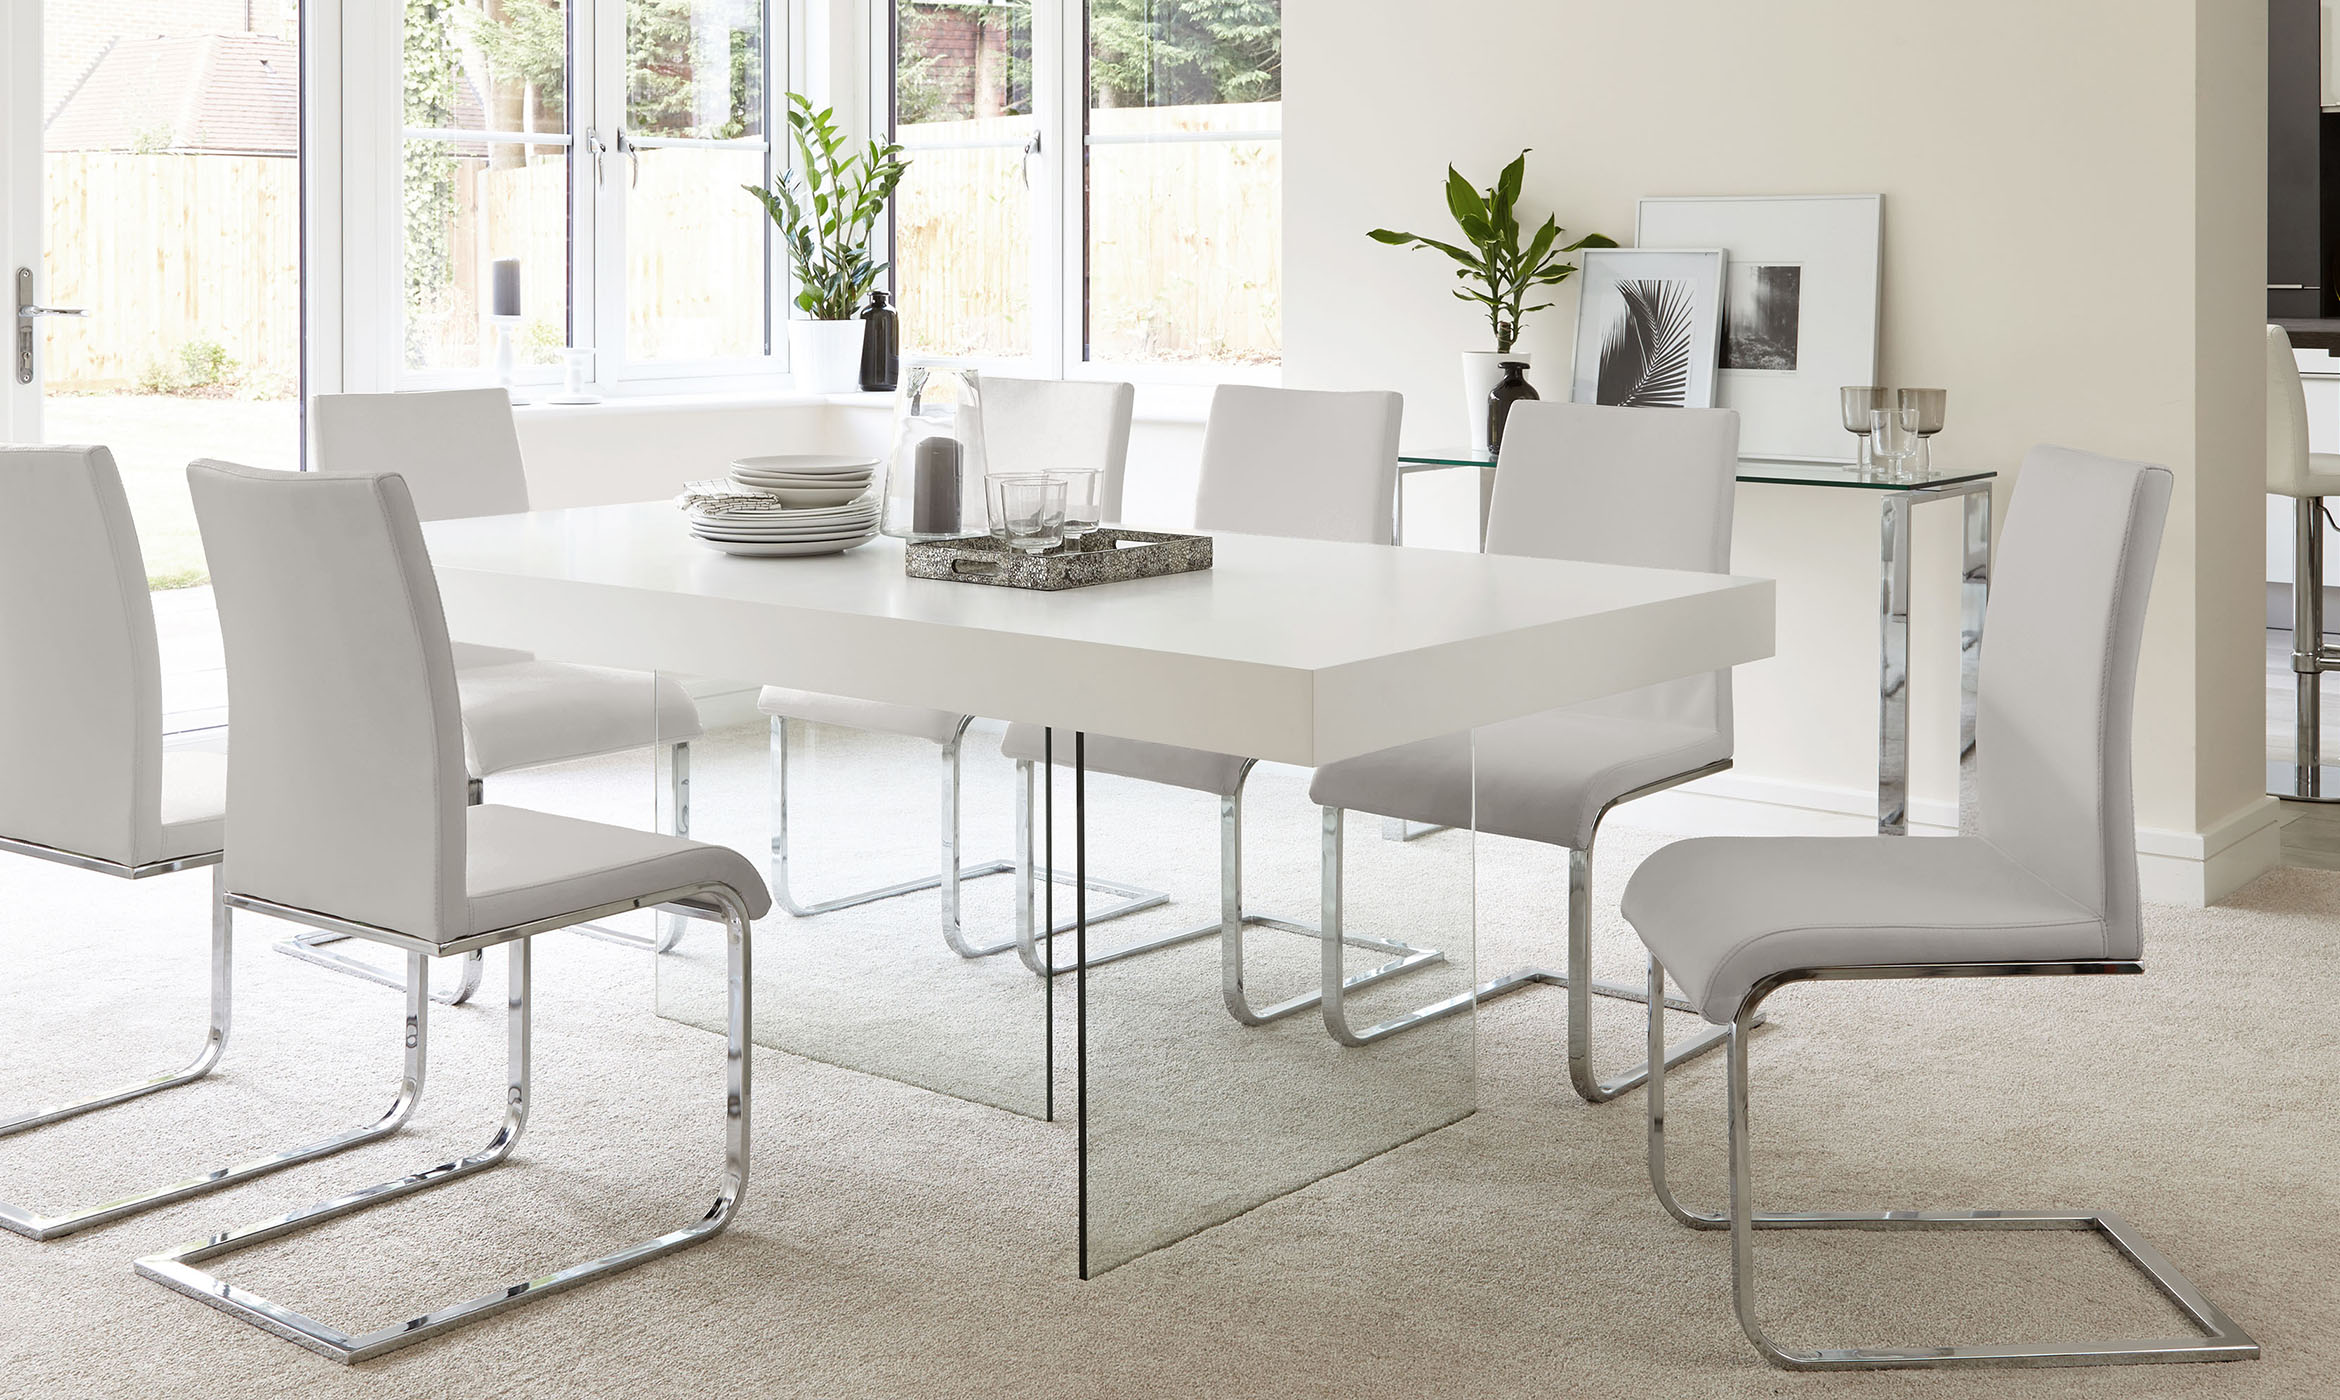 Aria White Wood Effect And Glass Dining, Round Glass Dining Table With White Leather Chairs